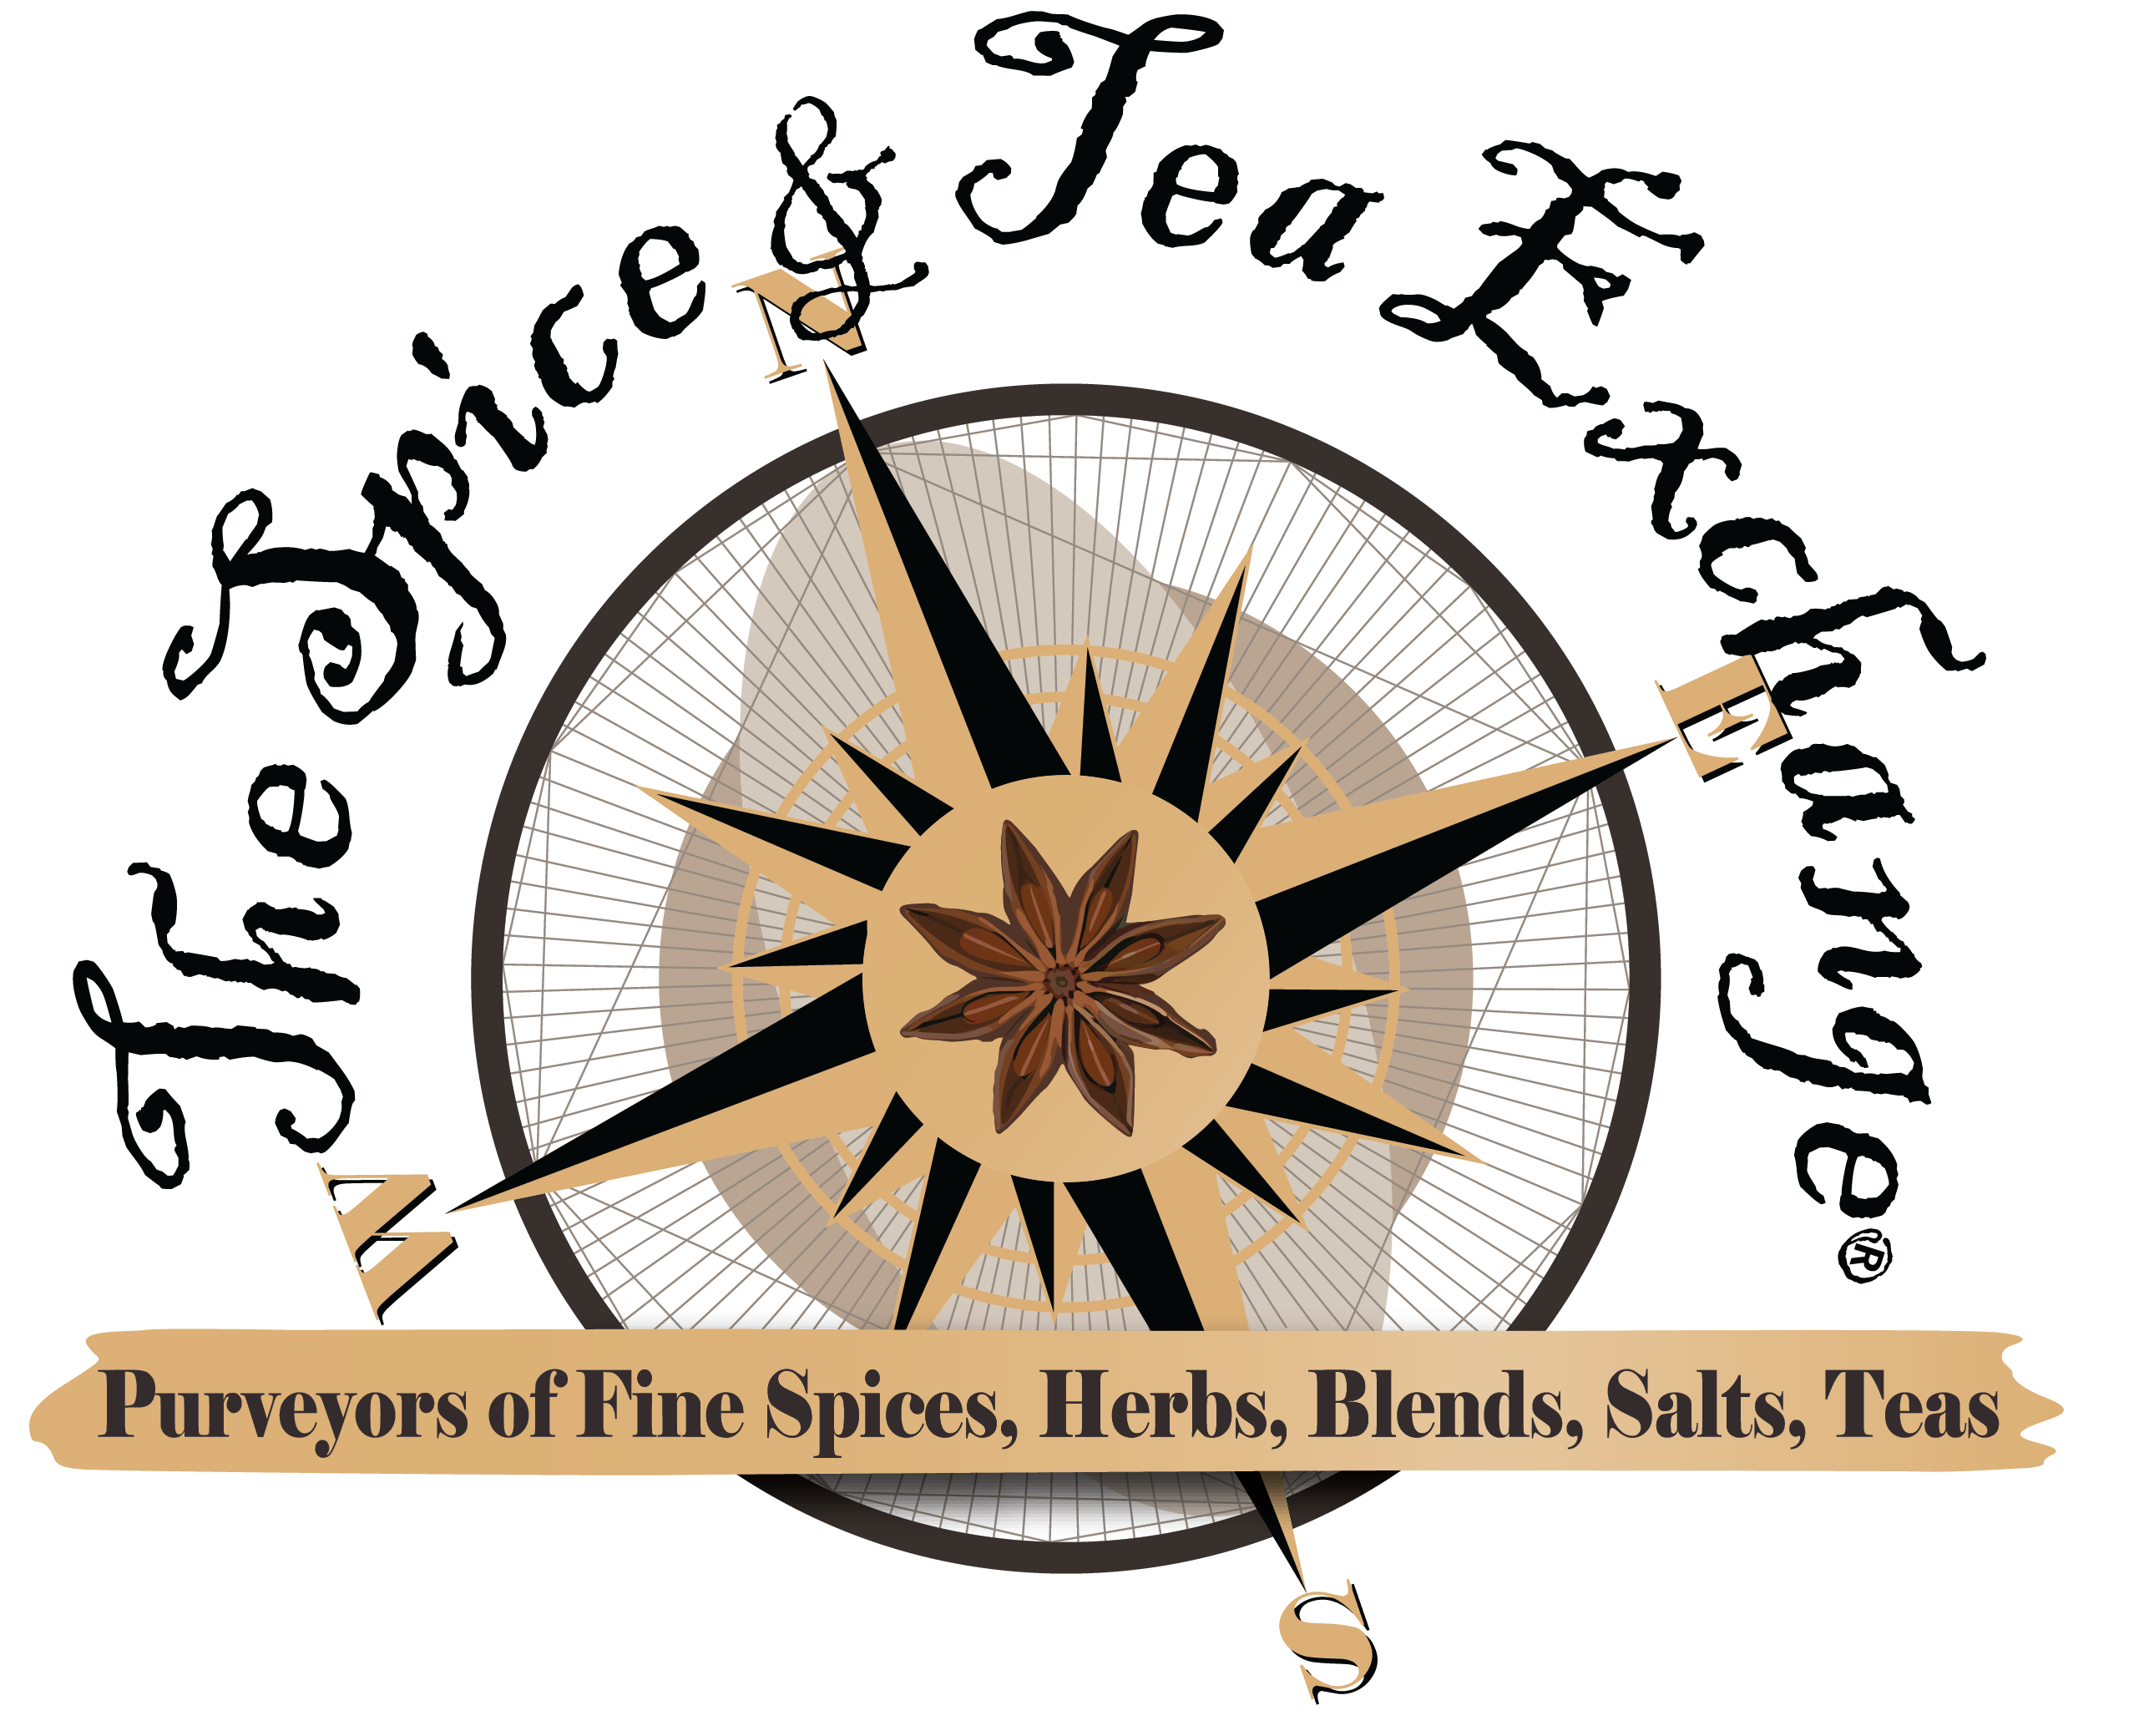 The Spice and Tea Exchange of Chagrin Falls